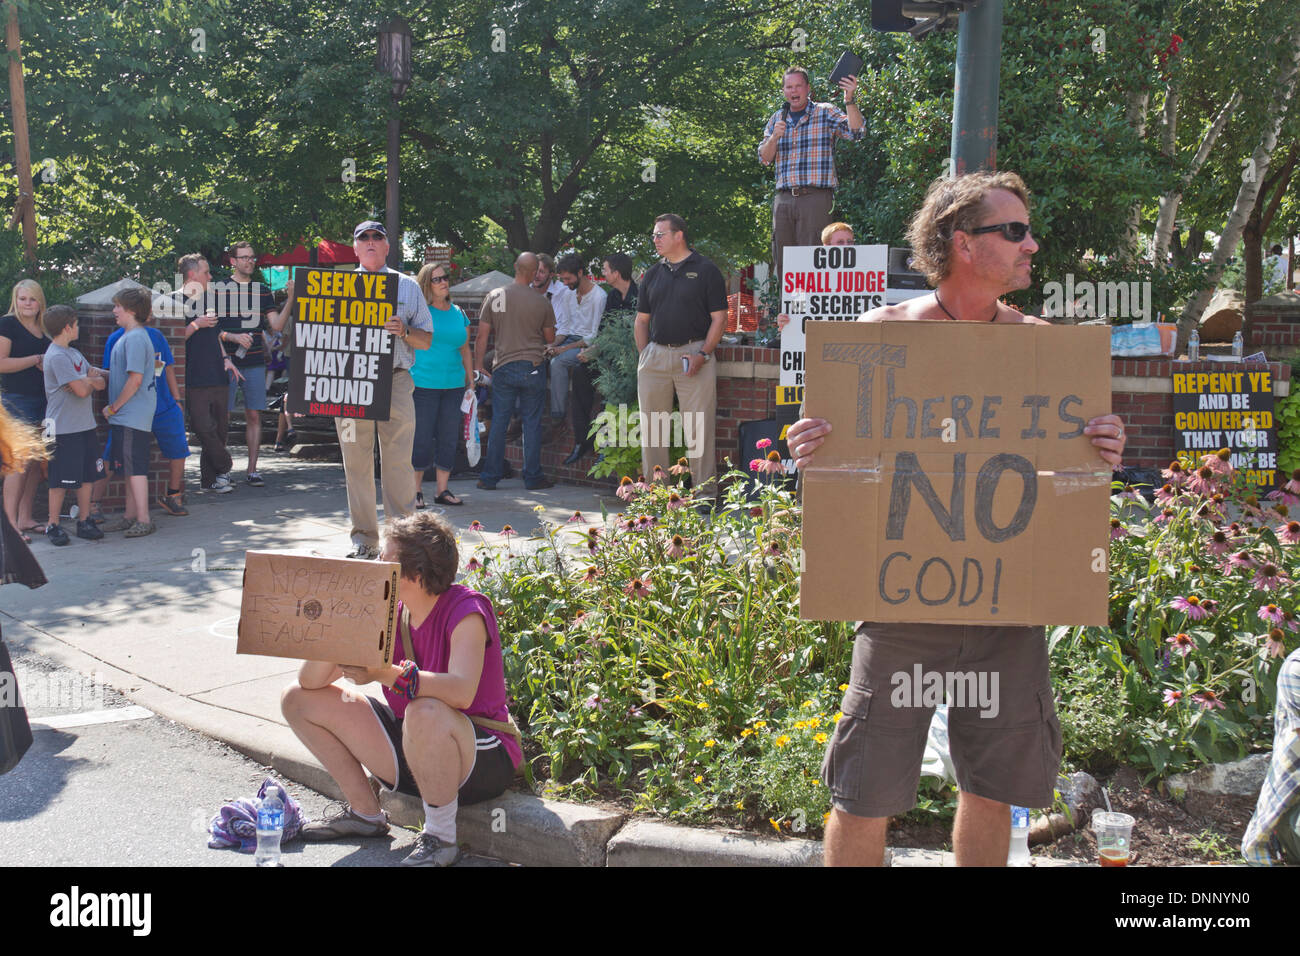 Asheville, North Carolina, USA - July 26, 2013: Christians and Atheists hold conflicting signs at the annual Bele Chere Festival Stock Photo